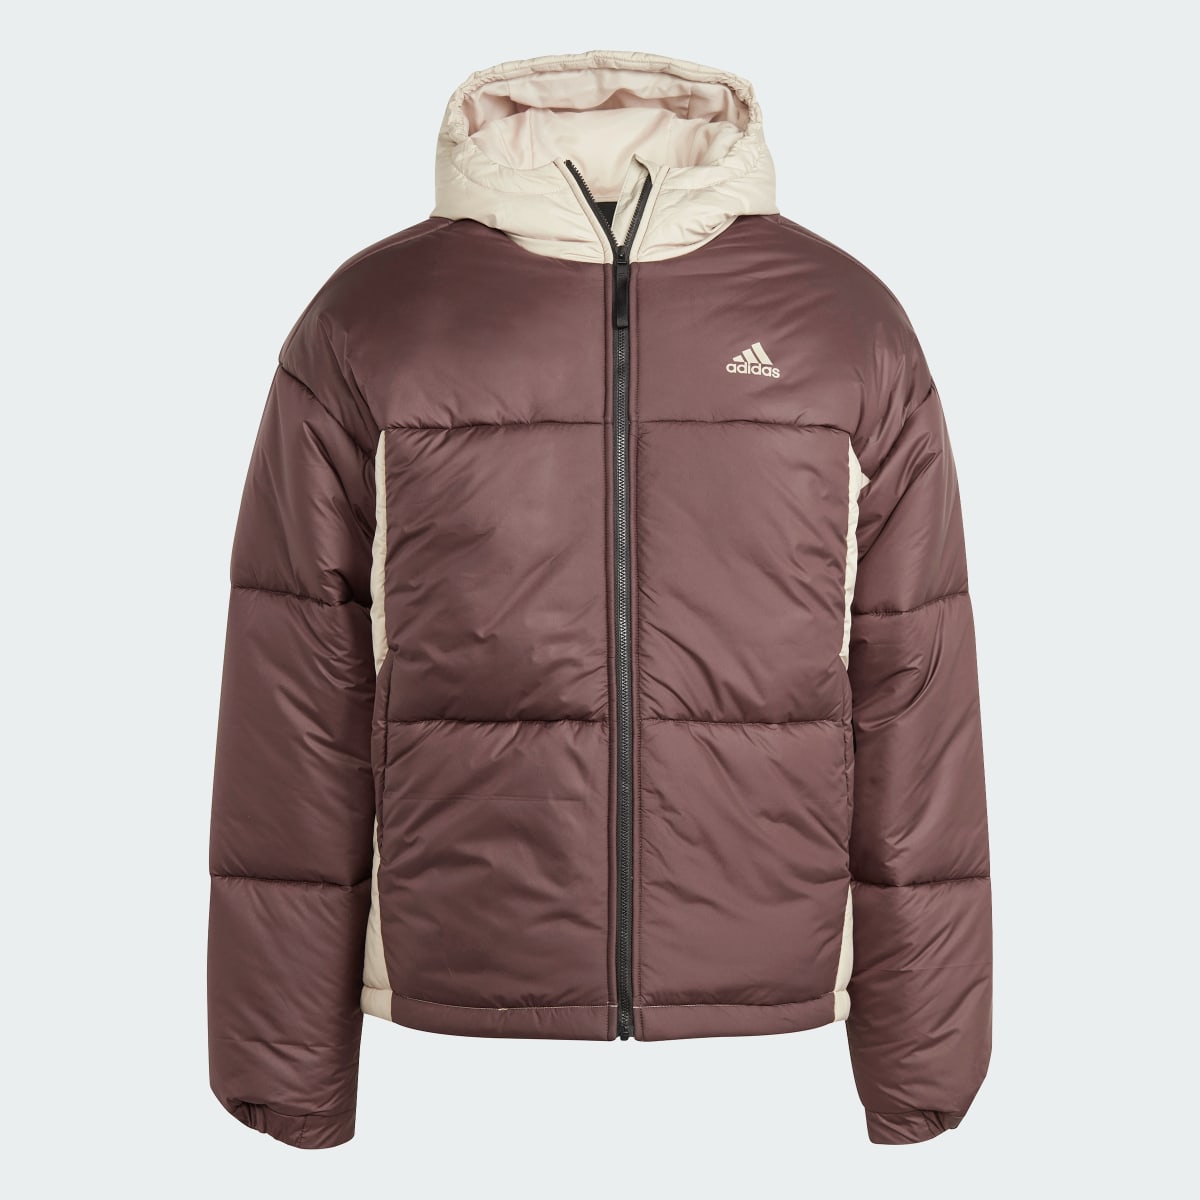 Adidas BSC 3-Stripes Puffy Hooded Jacket. 5